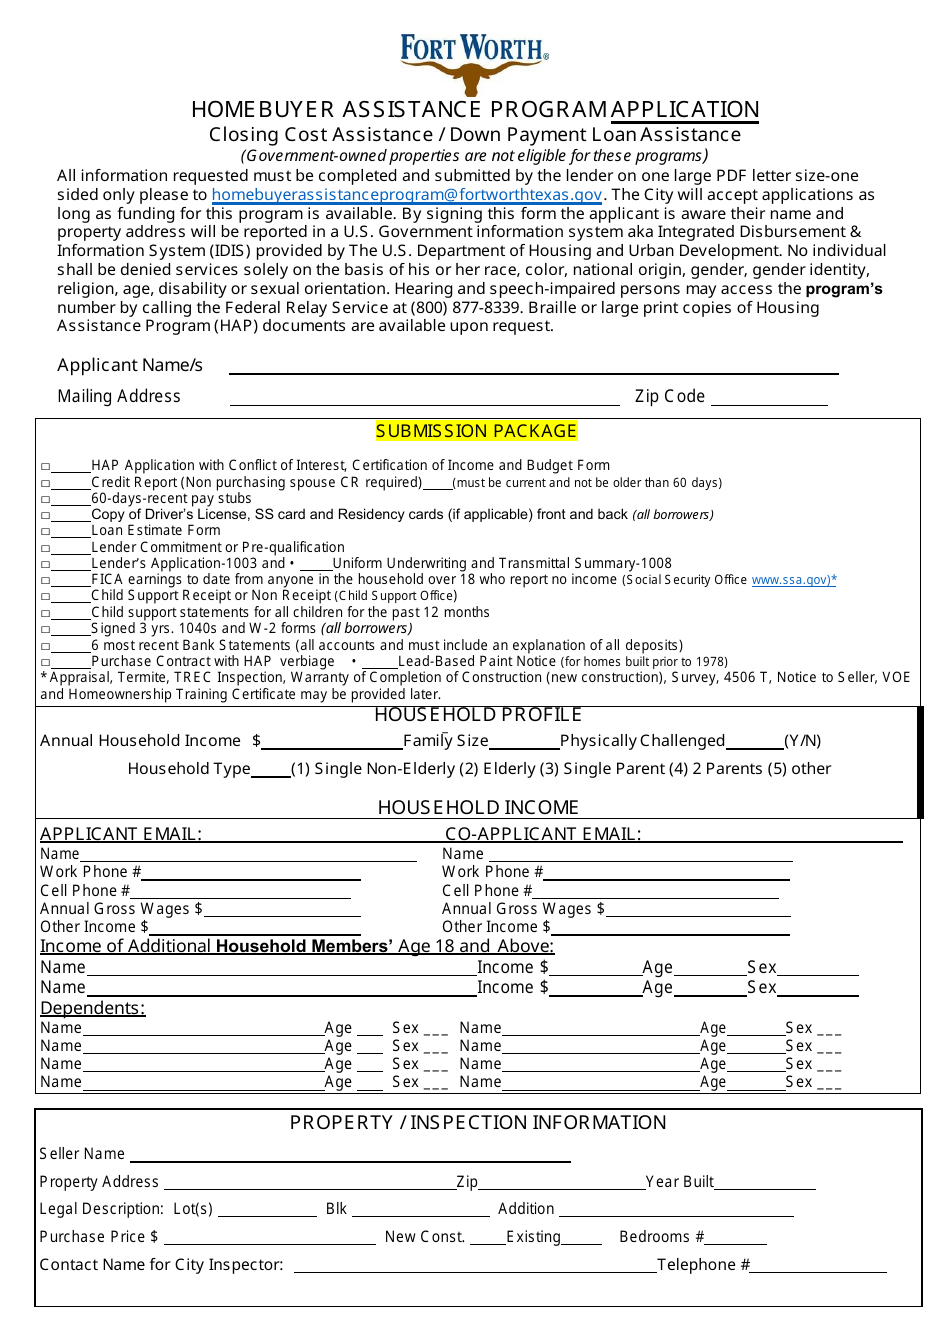 Homebuyer Assistance Program Application - City of Fort Worth, Texas, Page 1